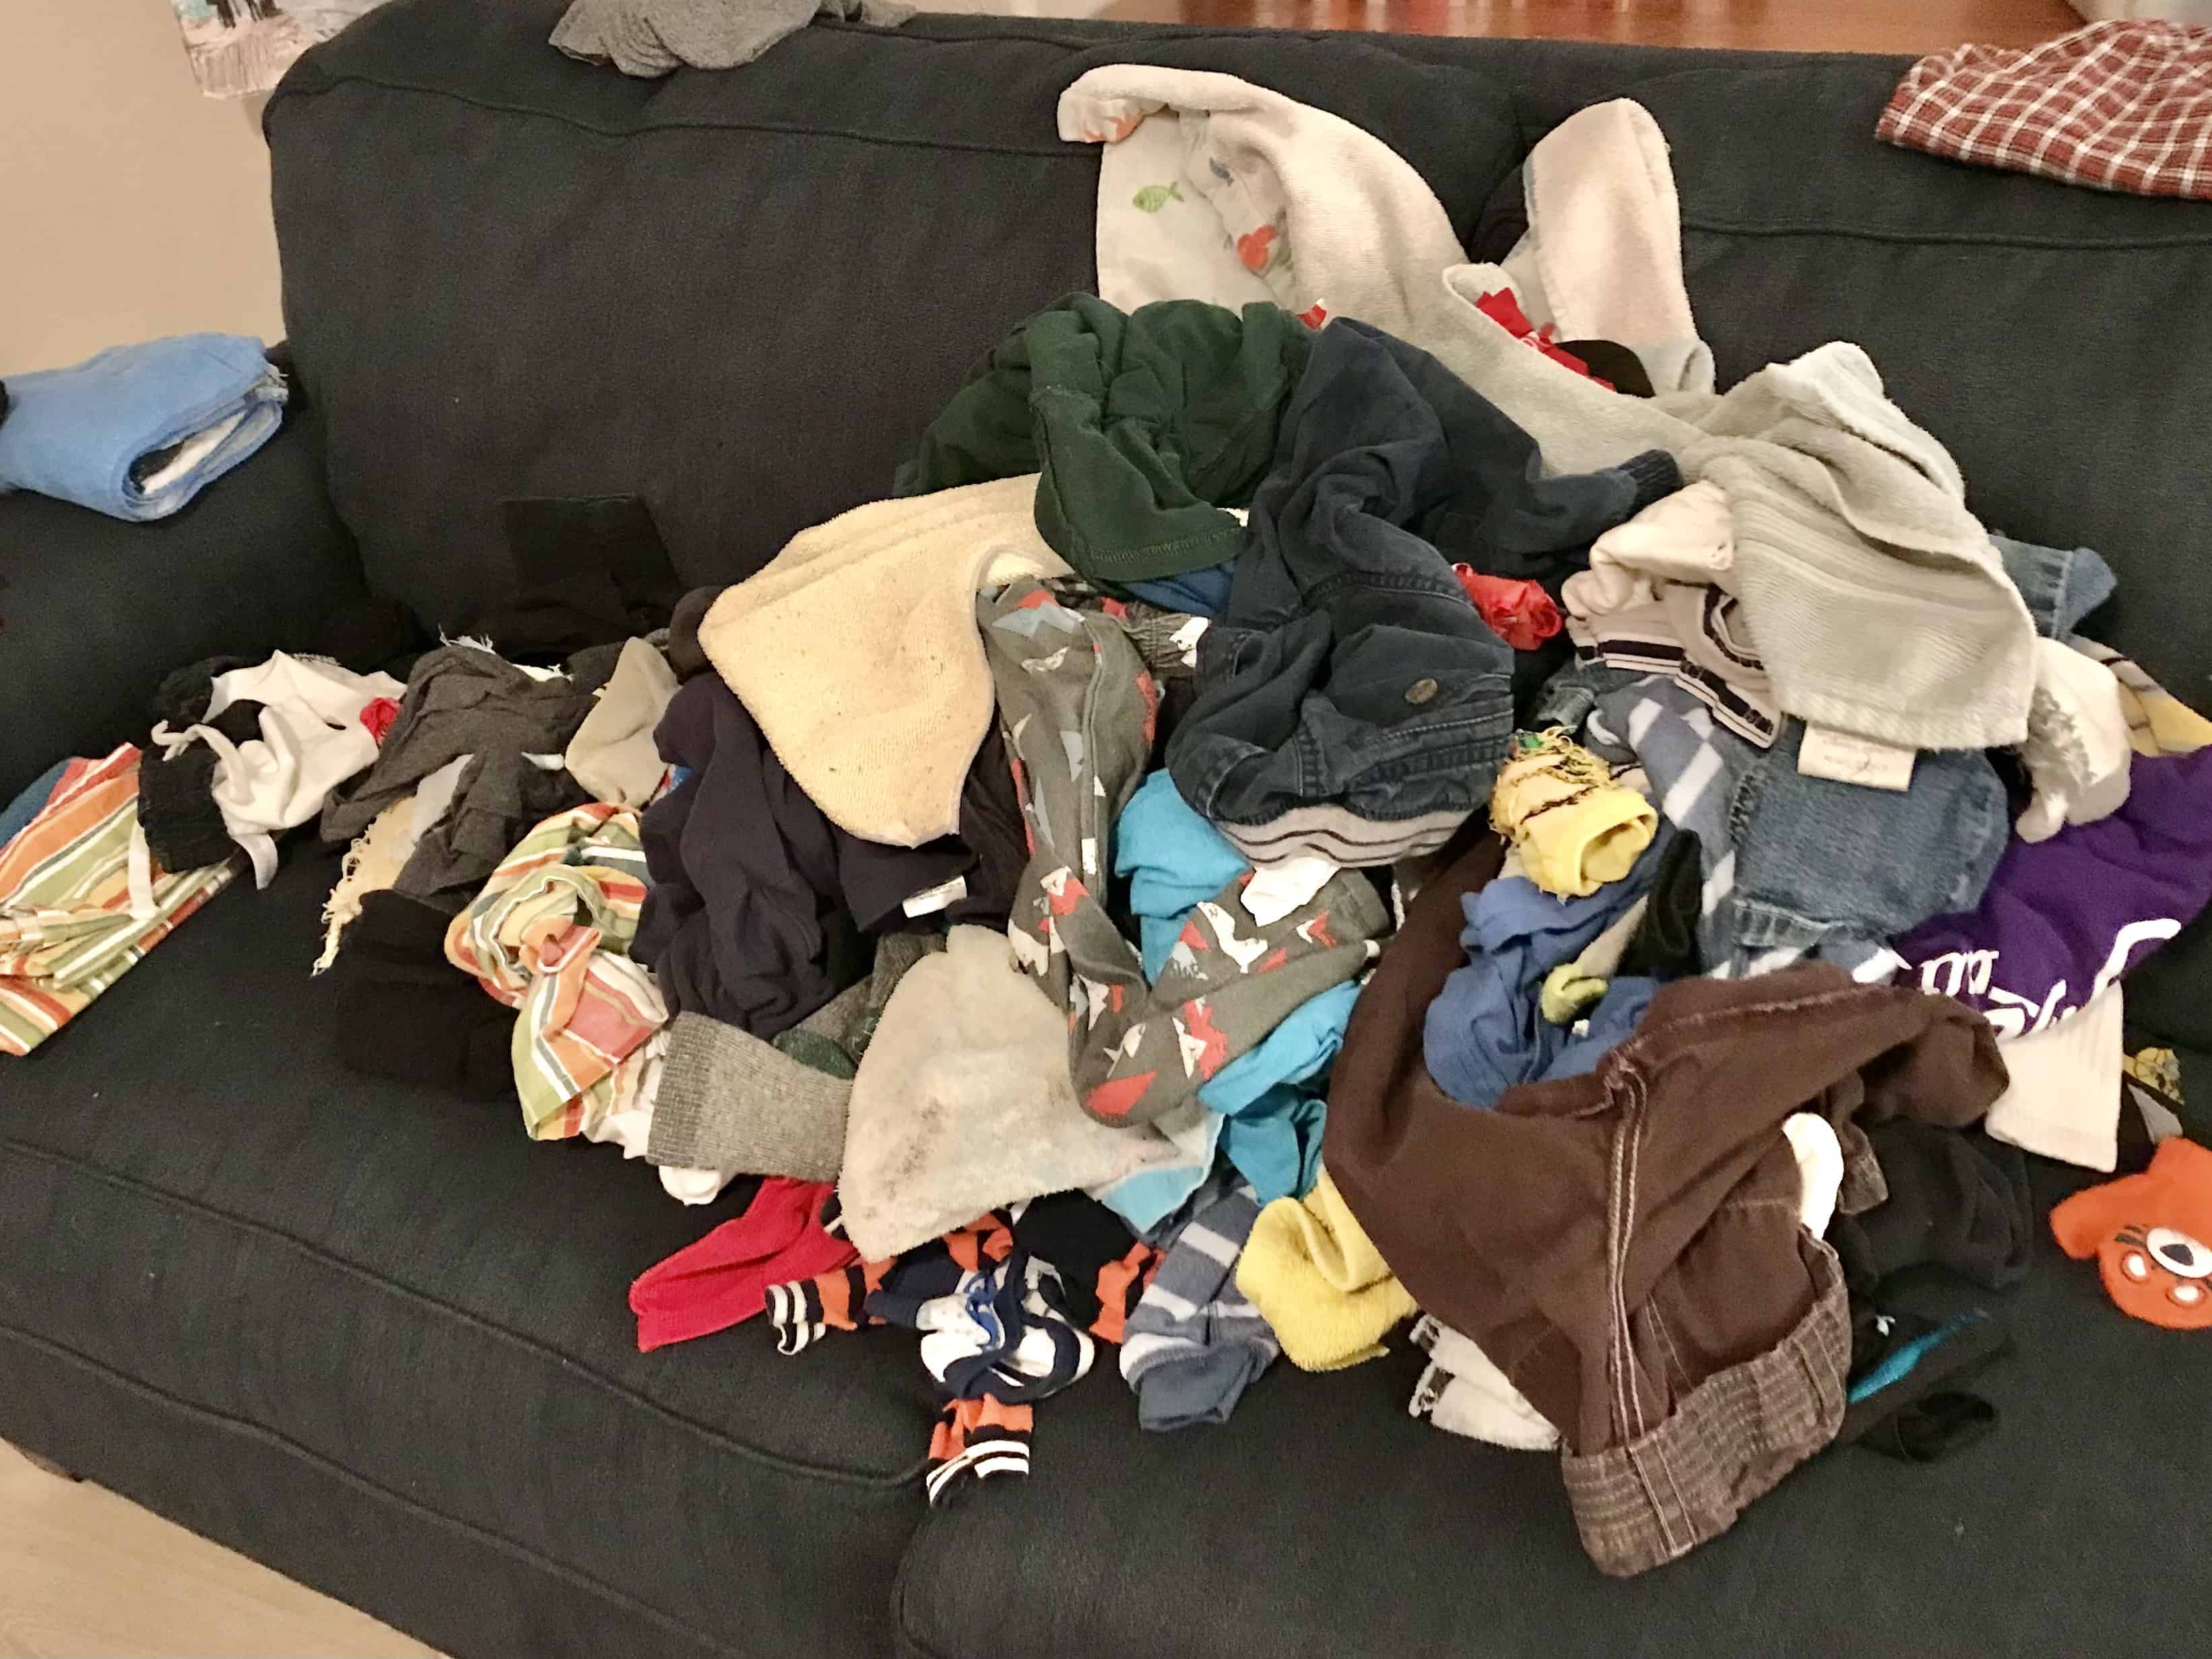 pile of laundry on couch